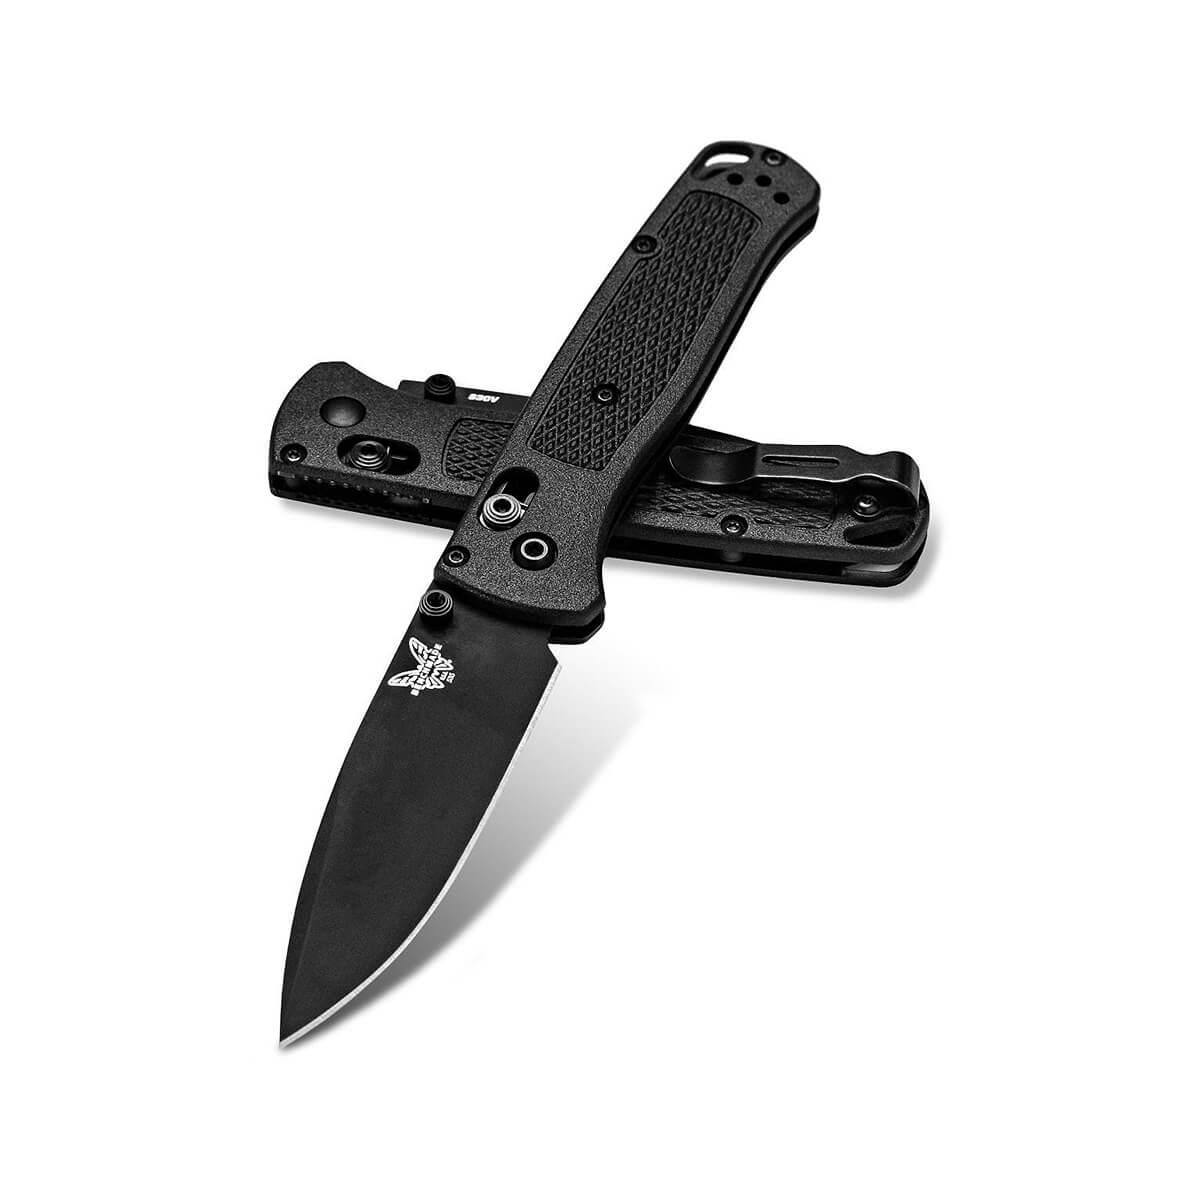  Bugout Black S30 Knife